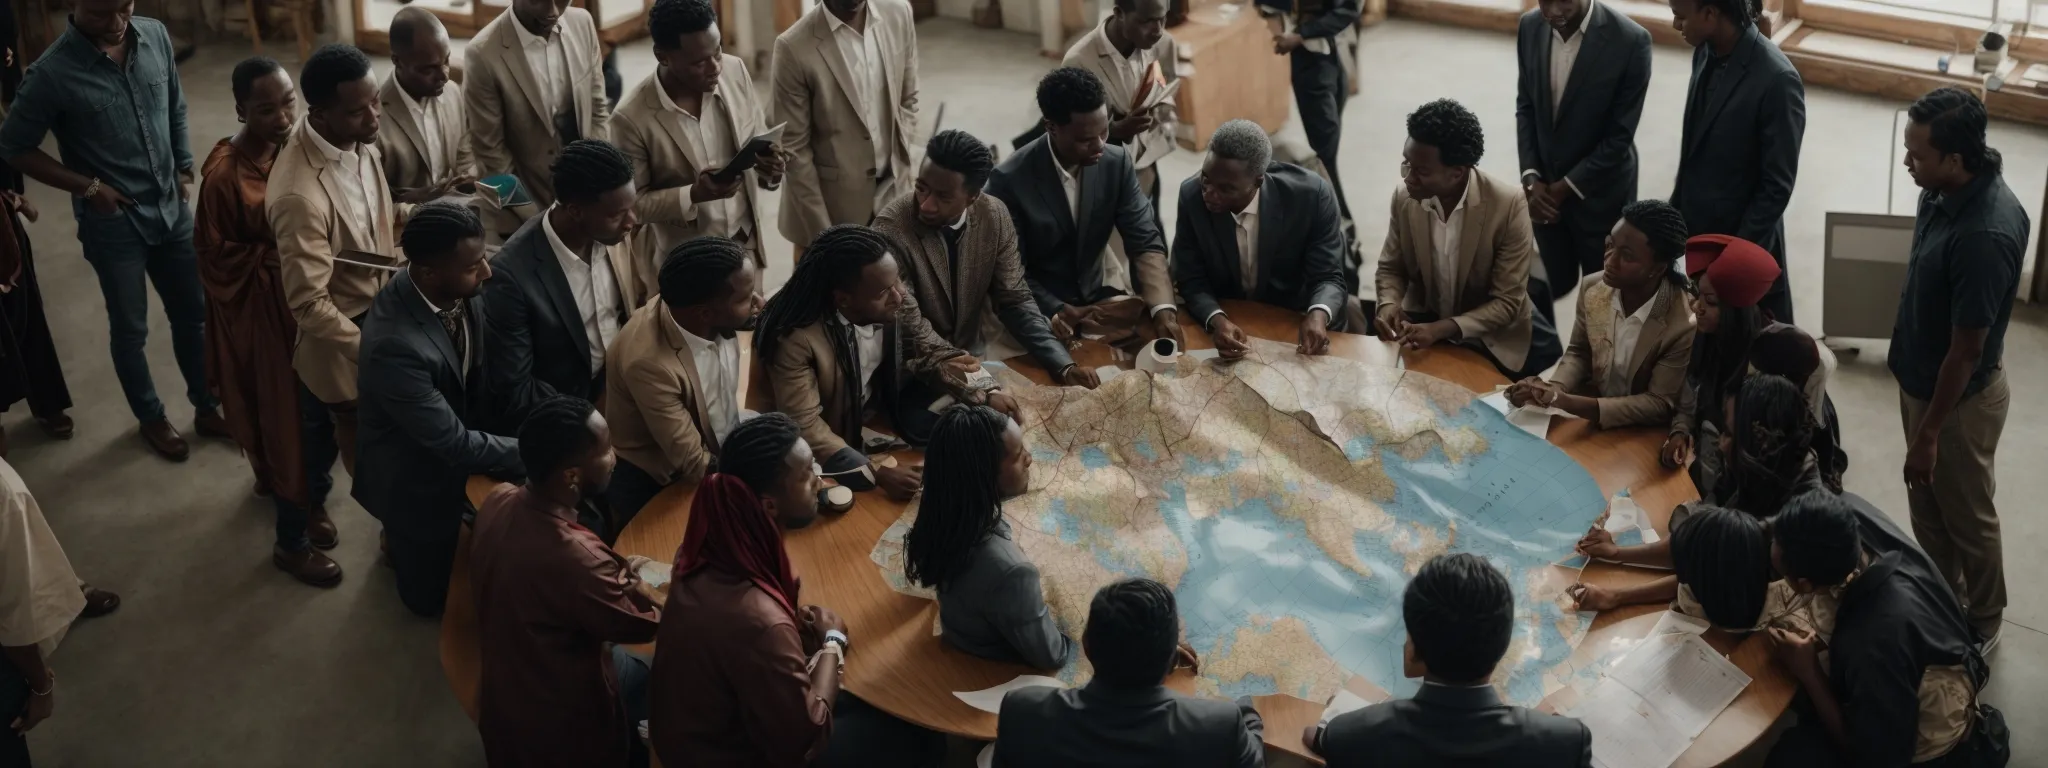 a diverse group of individuals from different cultural backgrounds engaged in a collaborative brainstorming session around a large table with a world map centerpiece.